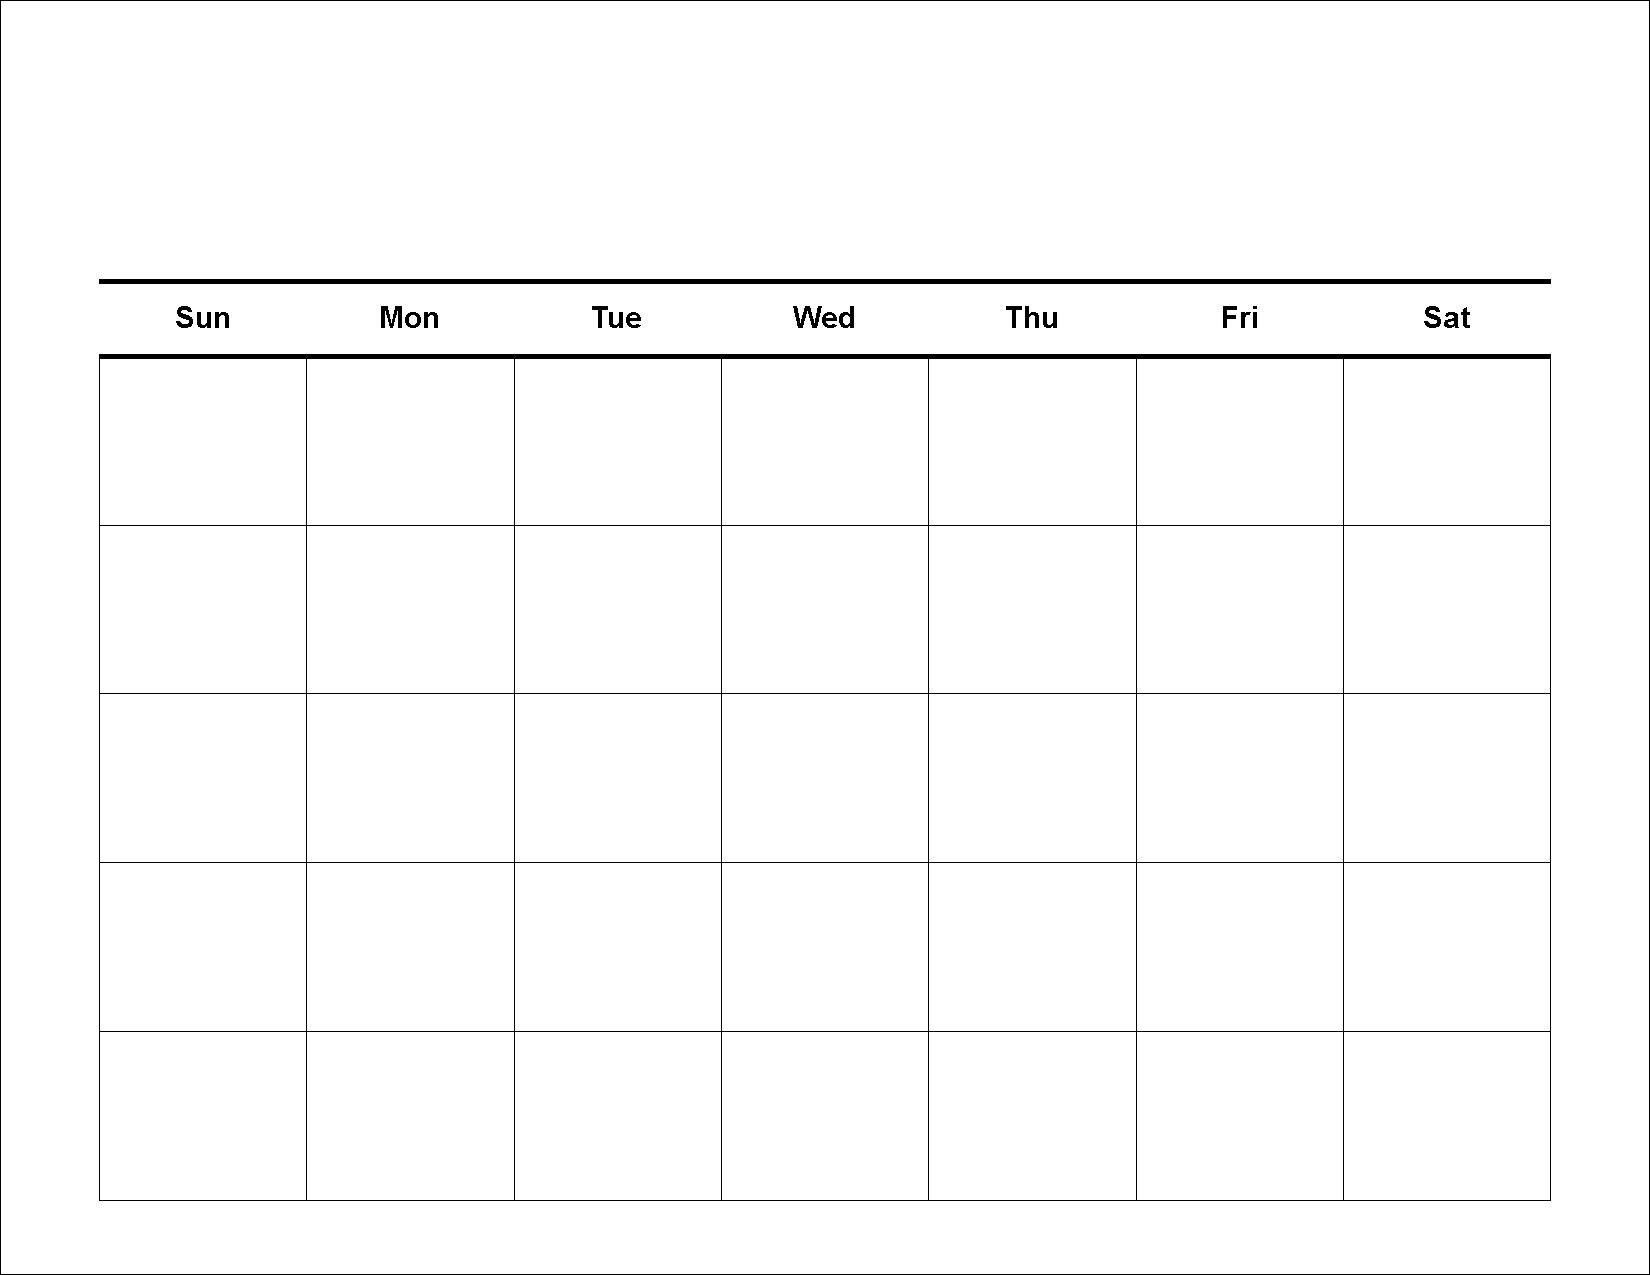 Printable 30 Day Blank Calendar In 2020 | Weekly Calendar intended for 30 Day Calendars Free Printable